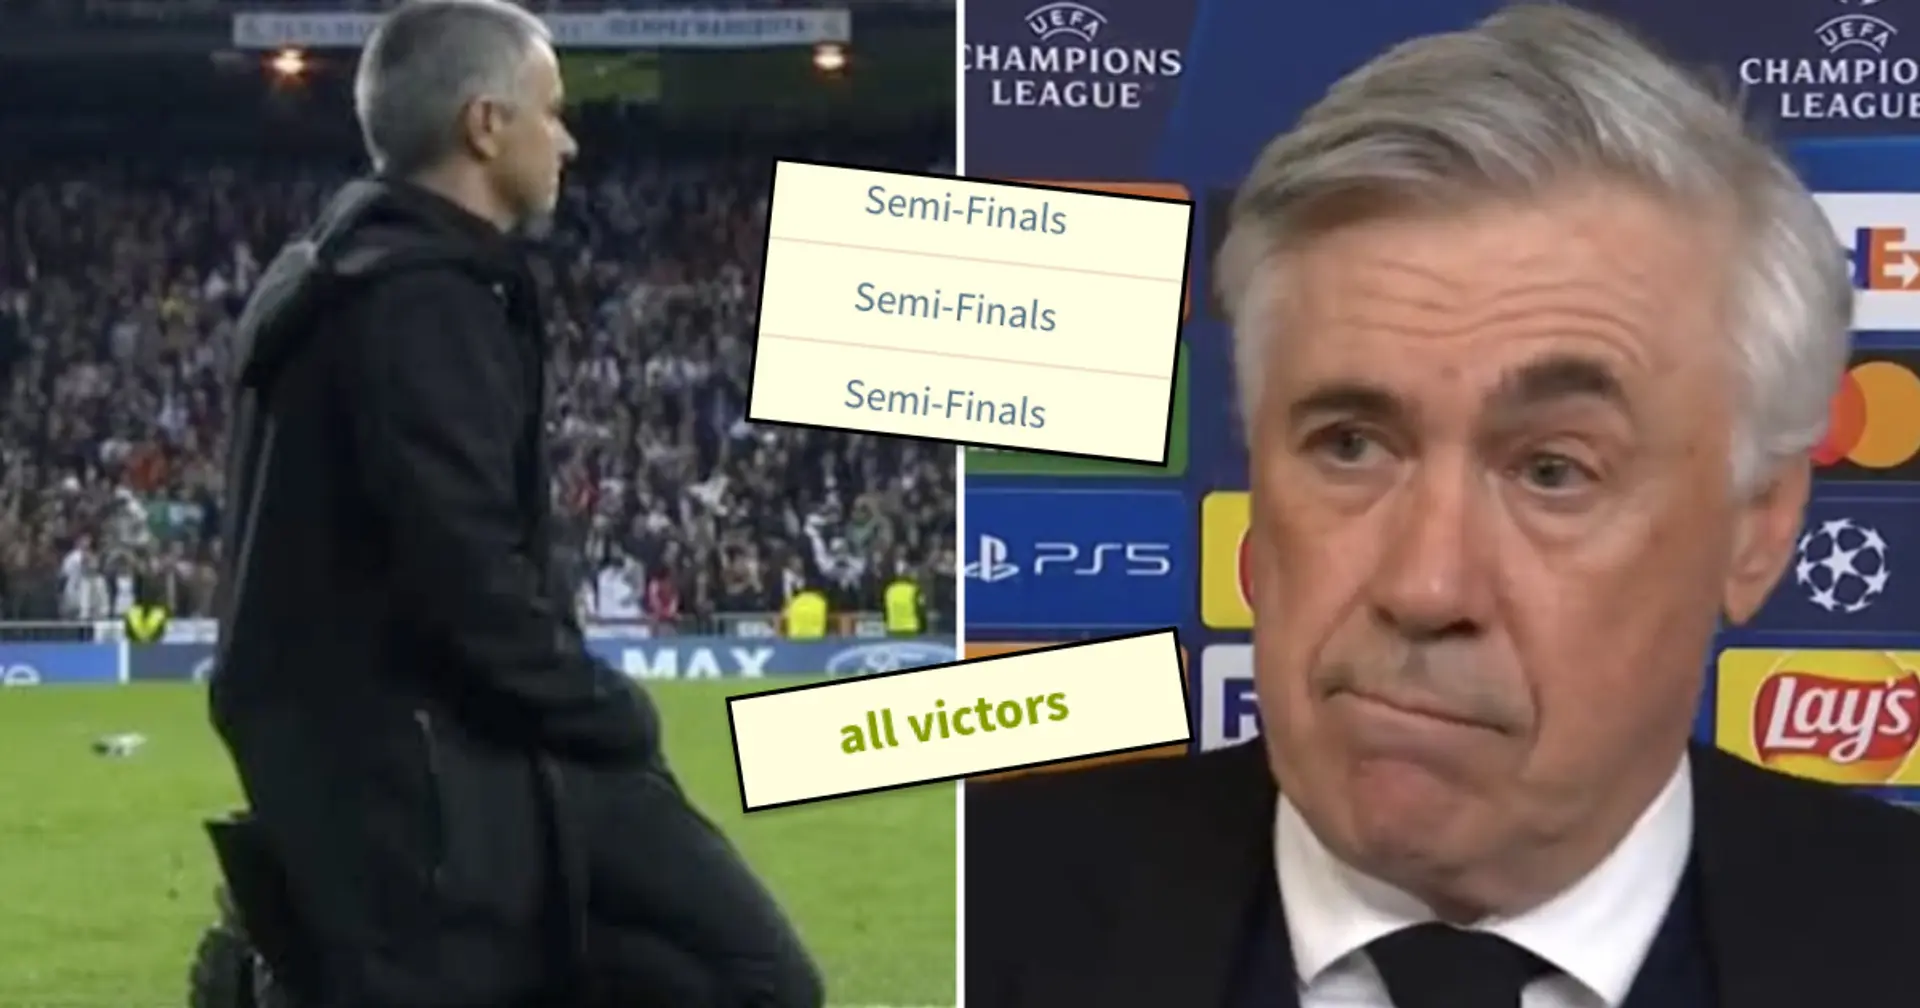 'Won us UCL when Mourinho failed it 3 times': fan stands up for Ancelotti amid Madrid poor run of form, insists Carlo 'deserves patience'